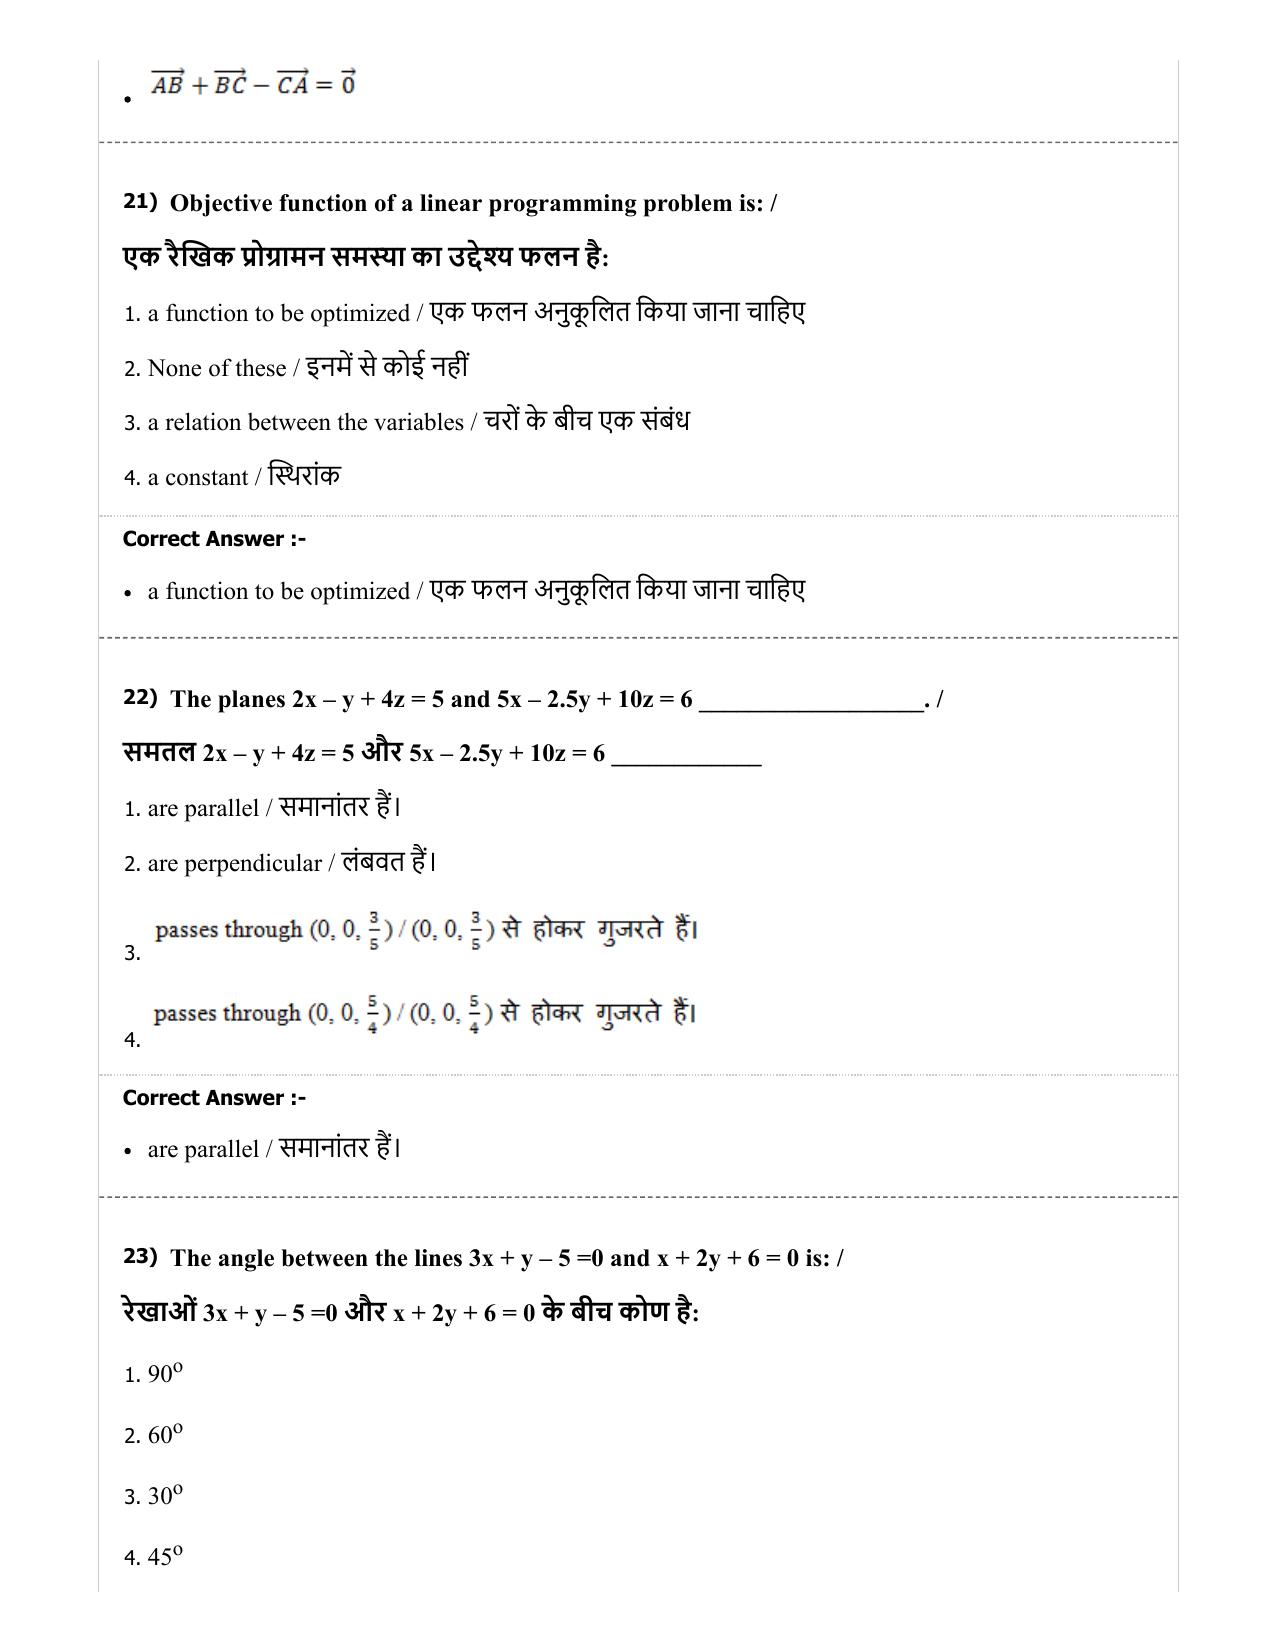 MP PAT (Exam. Date 29/06/2019 Time 2:00 PM) - PCM Question Paper - Page 47